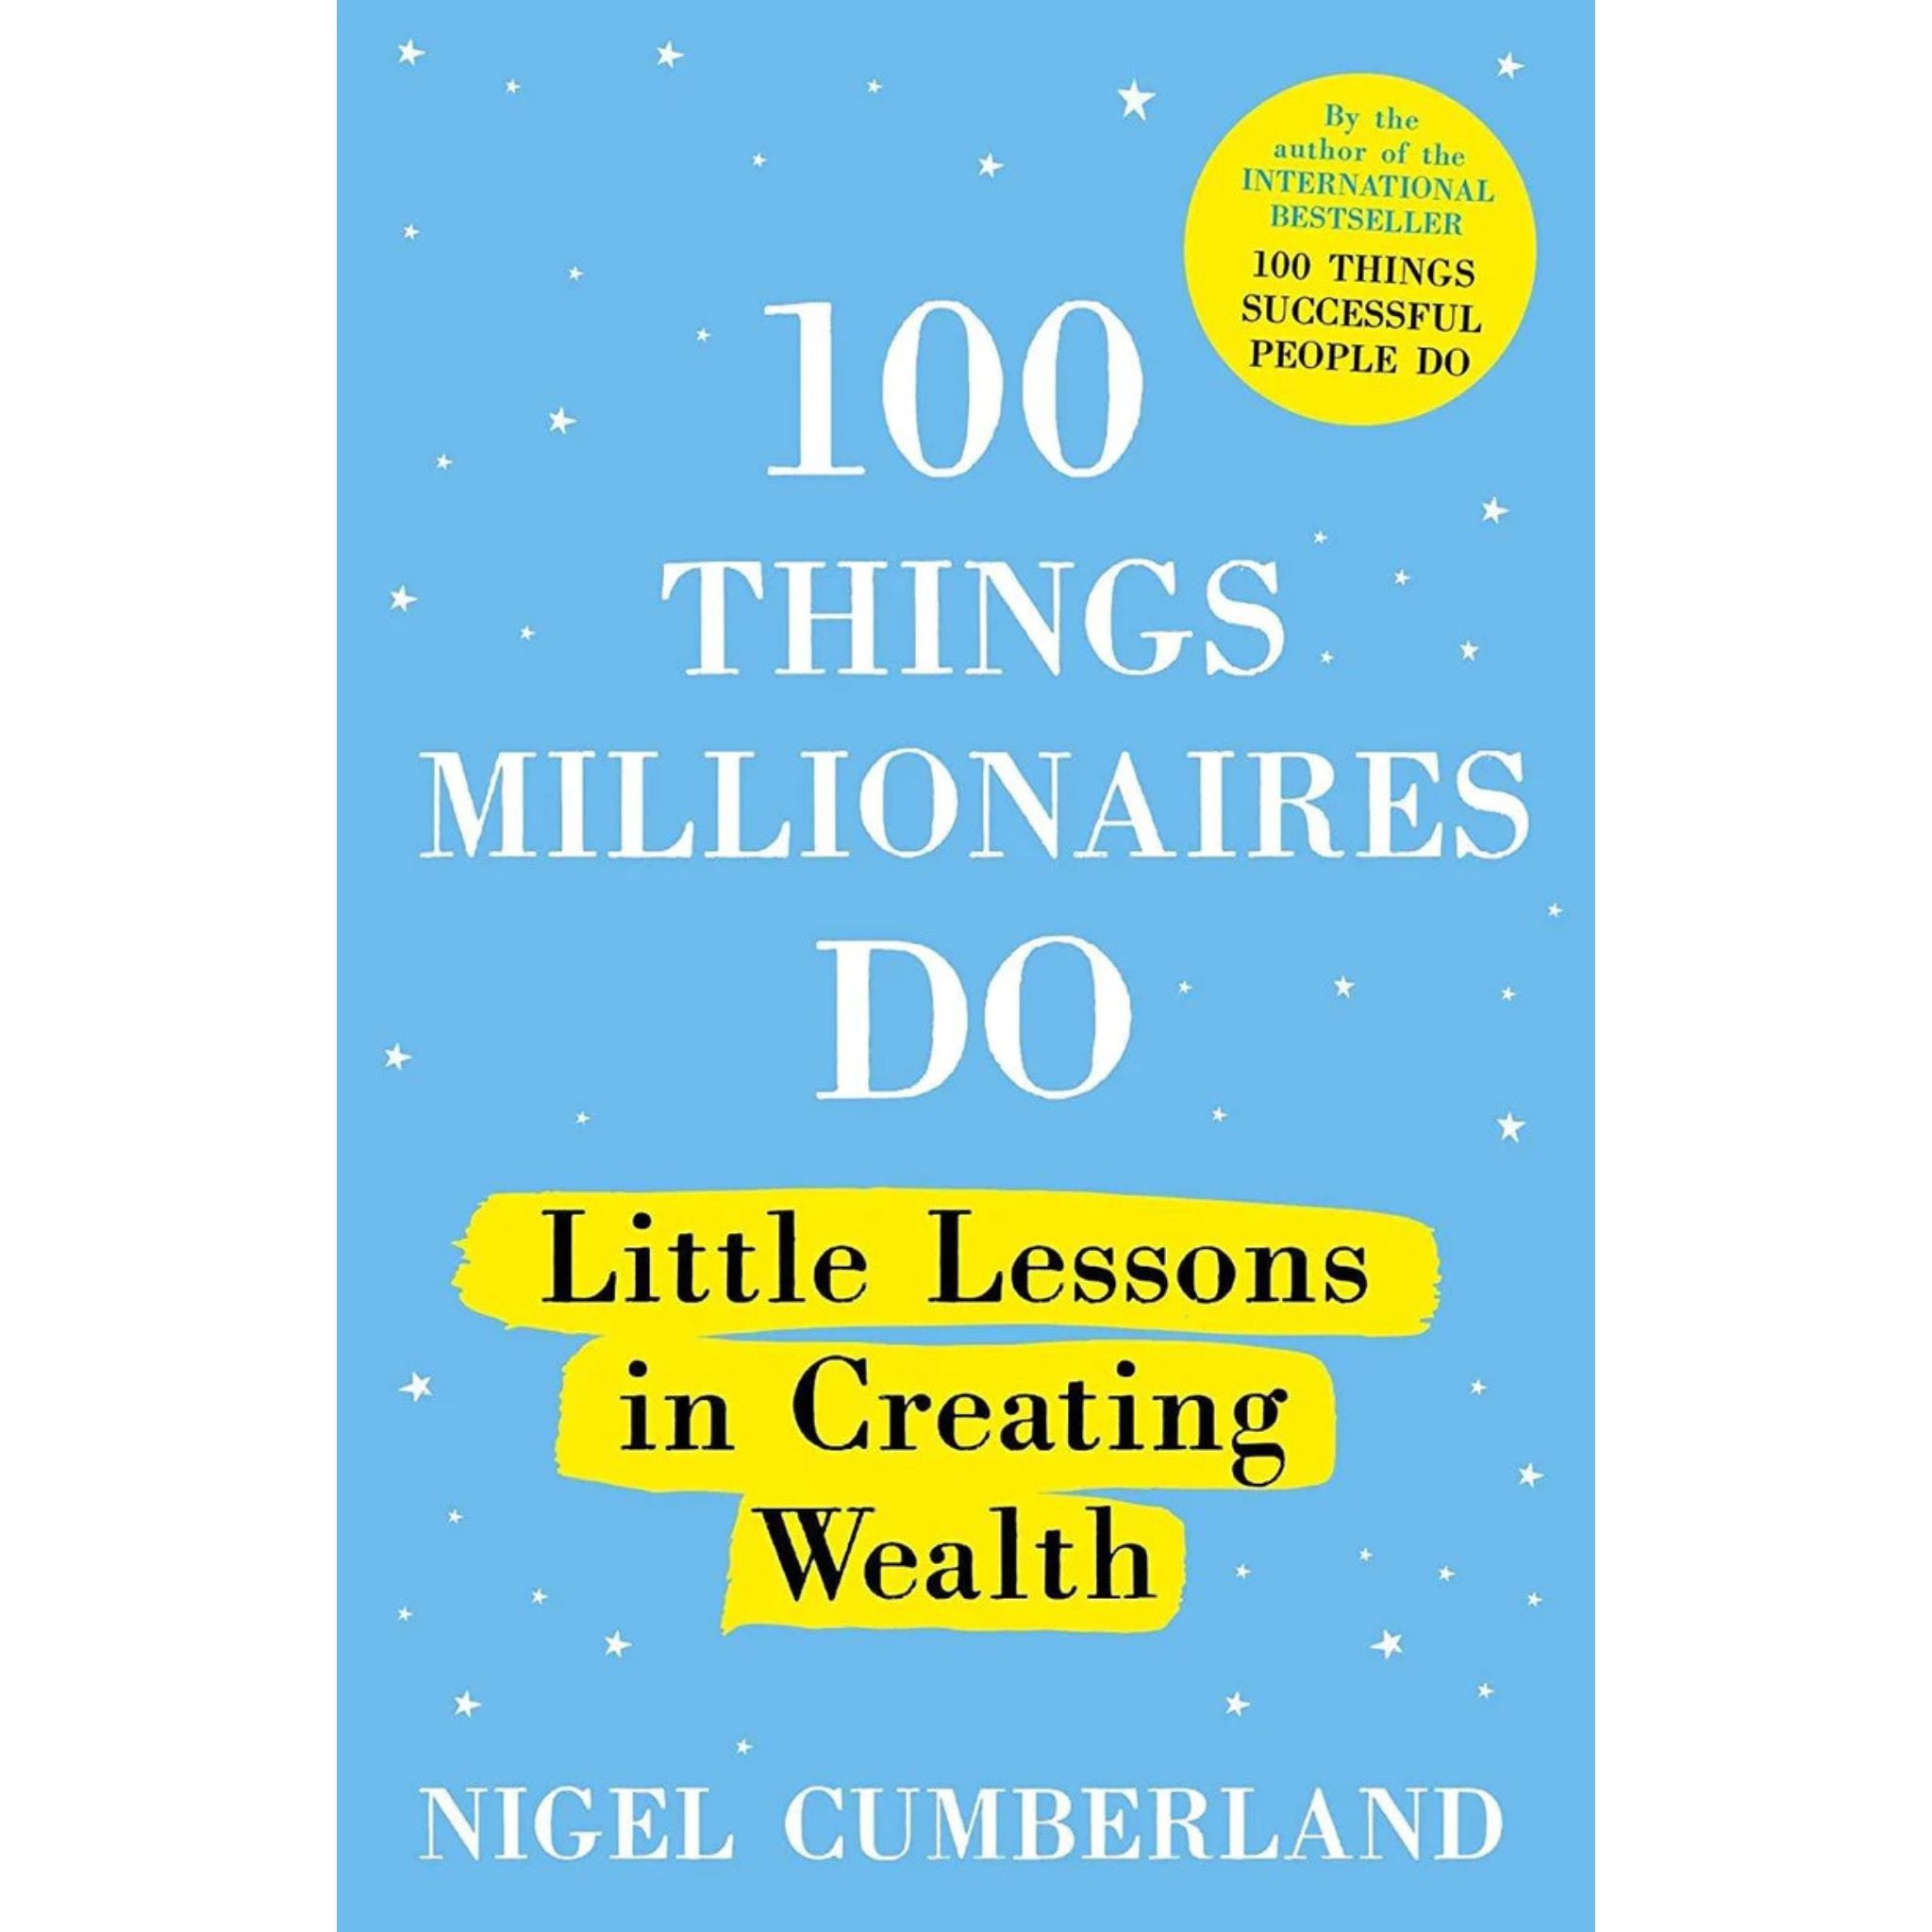 100 Things Millionaires Do (Little Lessons In Creating Wealth) By Nigel Cumberland